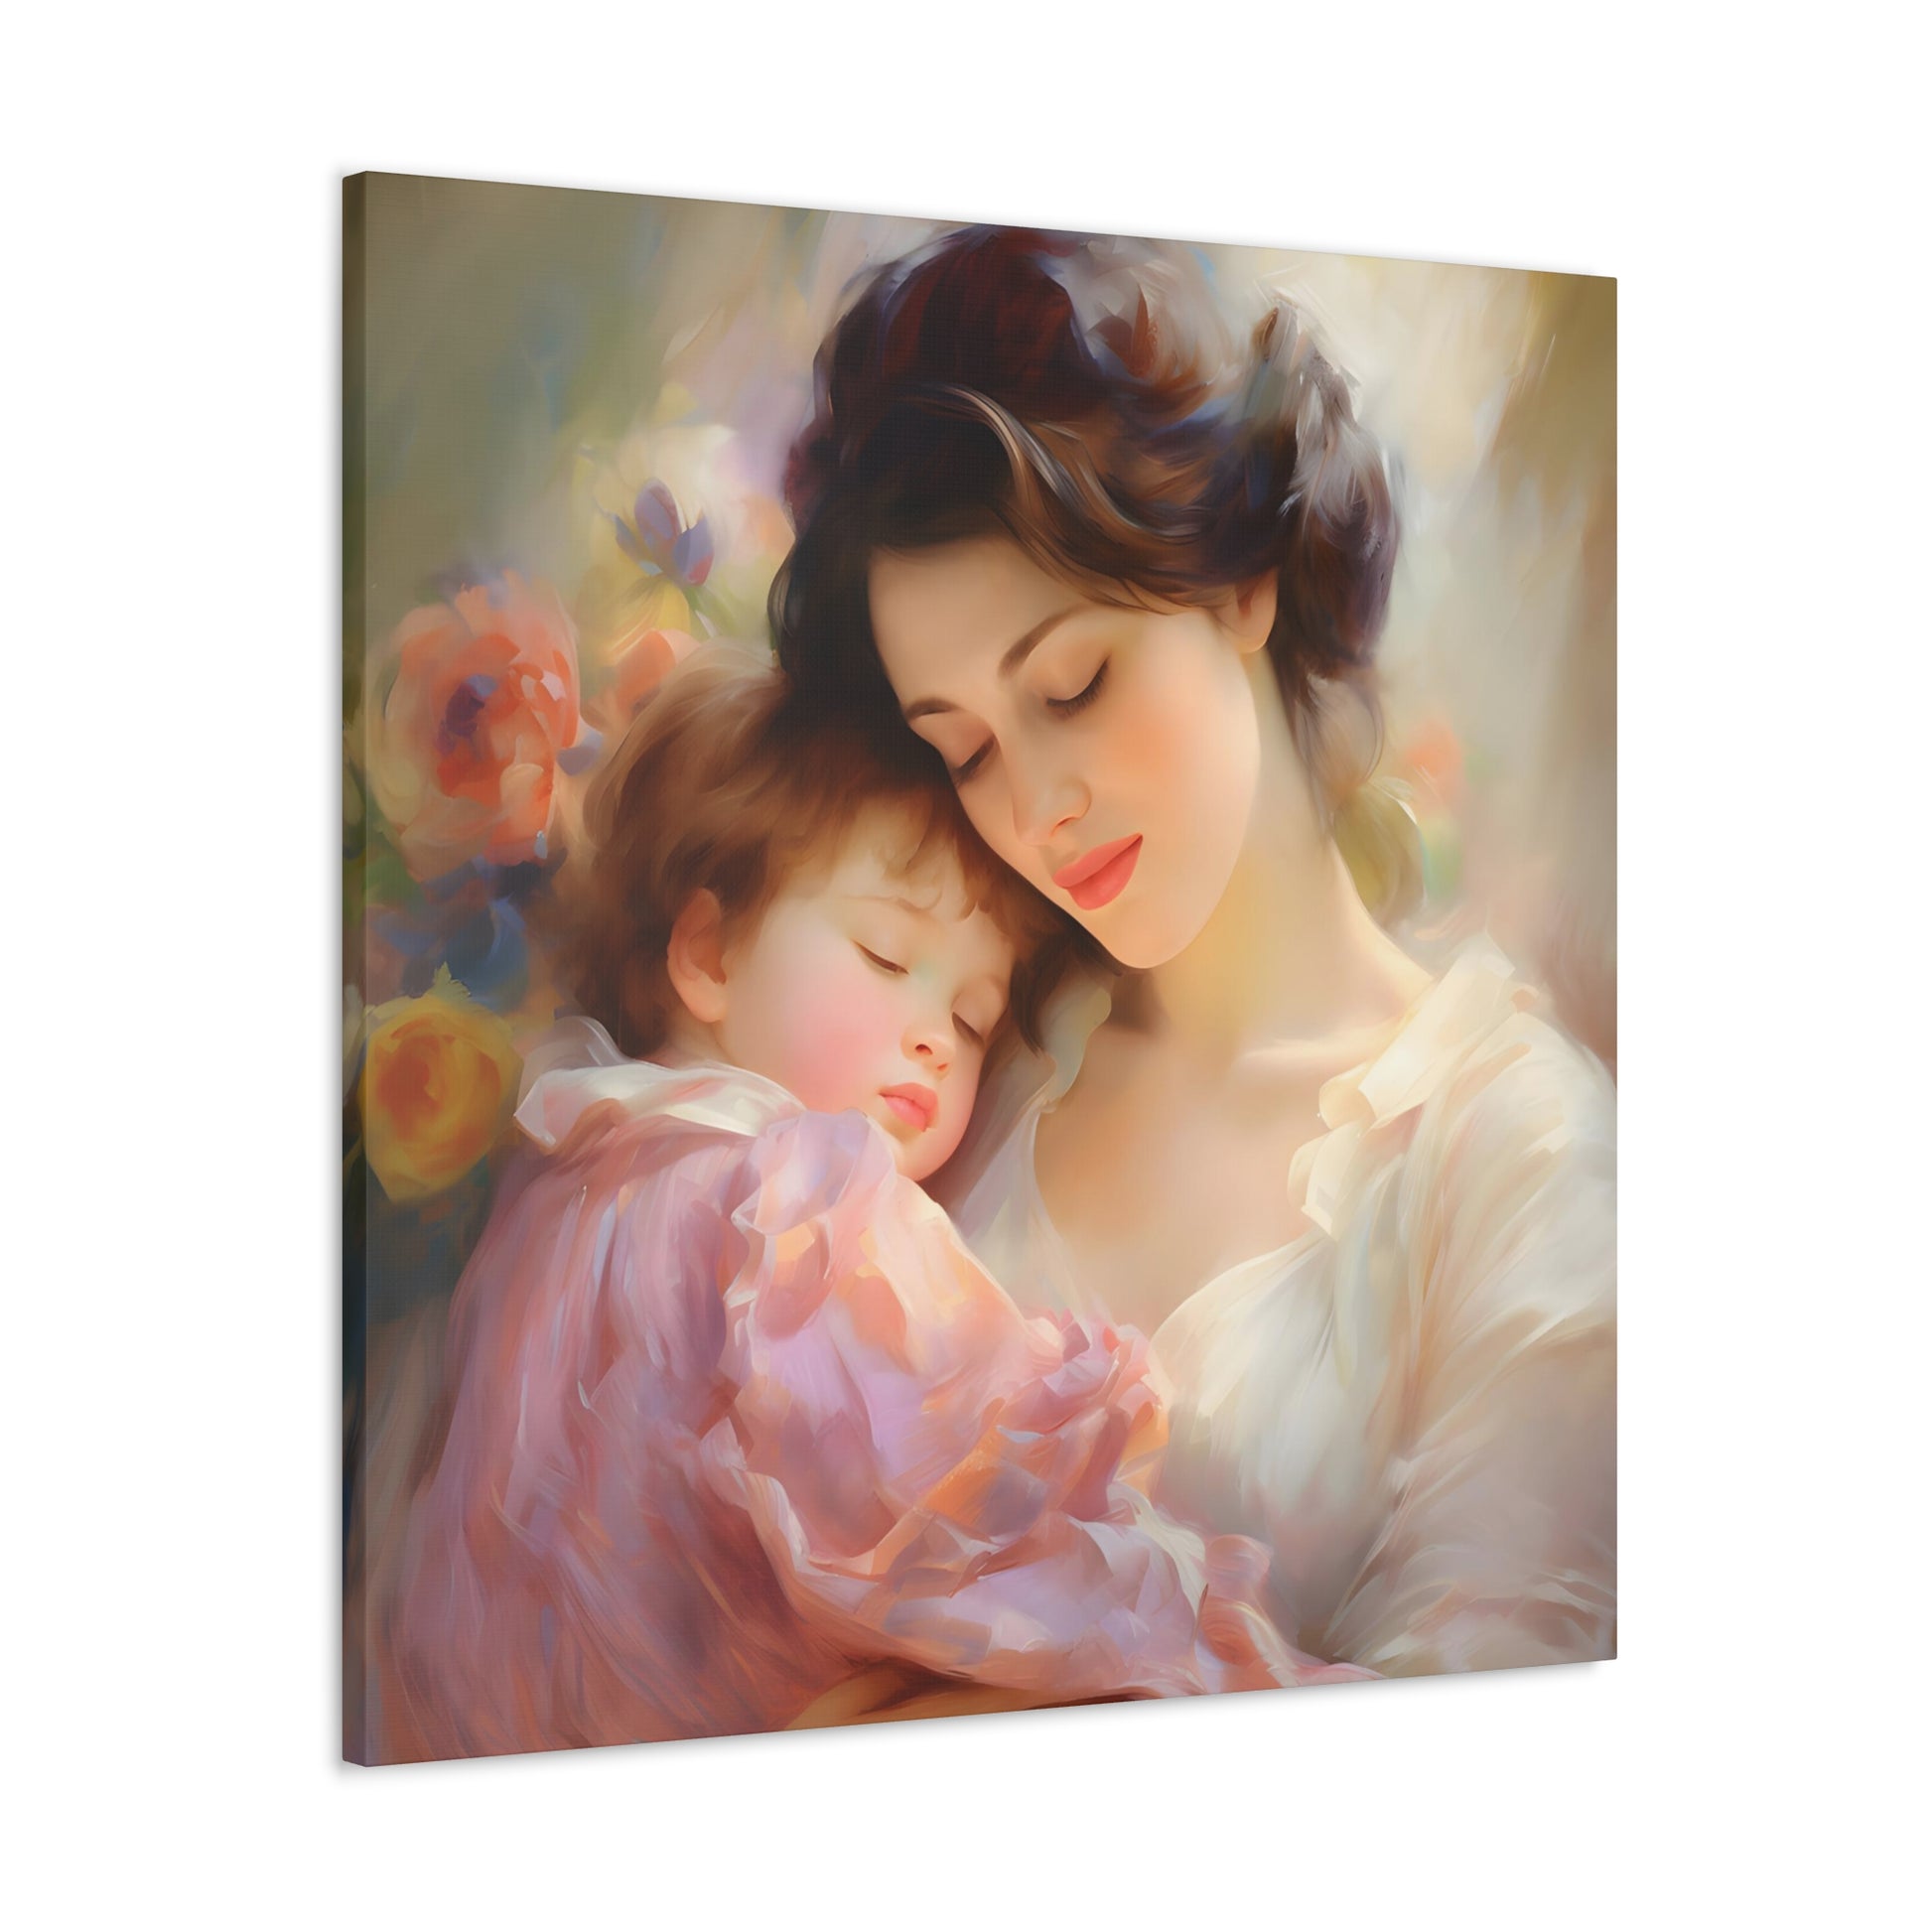 angle 4 Clara Sutton's 'Maternal Serenity,' an Impressionist-inspired painting, depicts the tender bond between mother and child with a warm palette and diffused light, exuding tranquility.